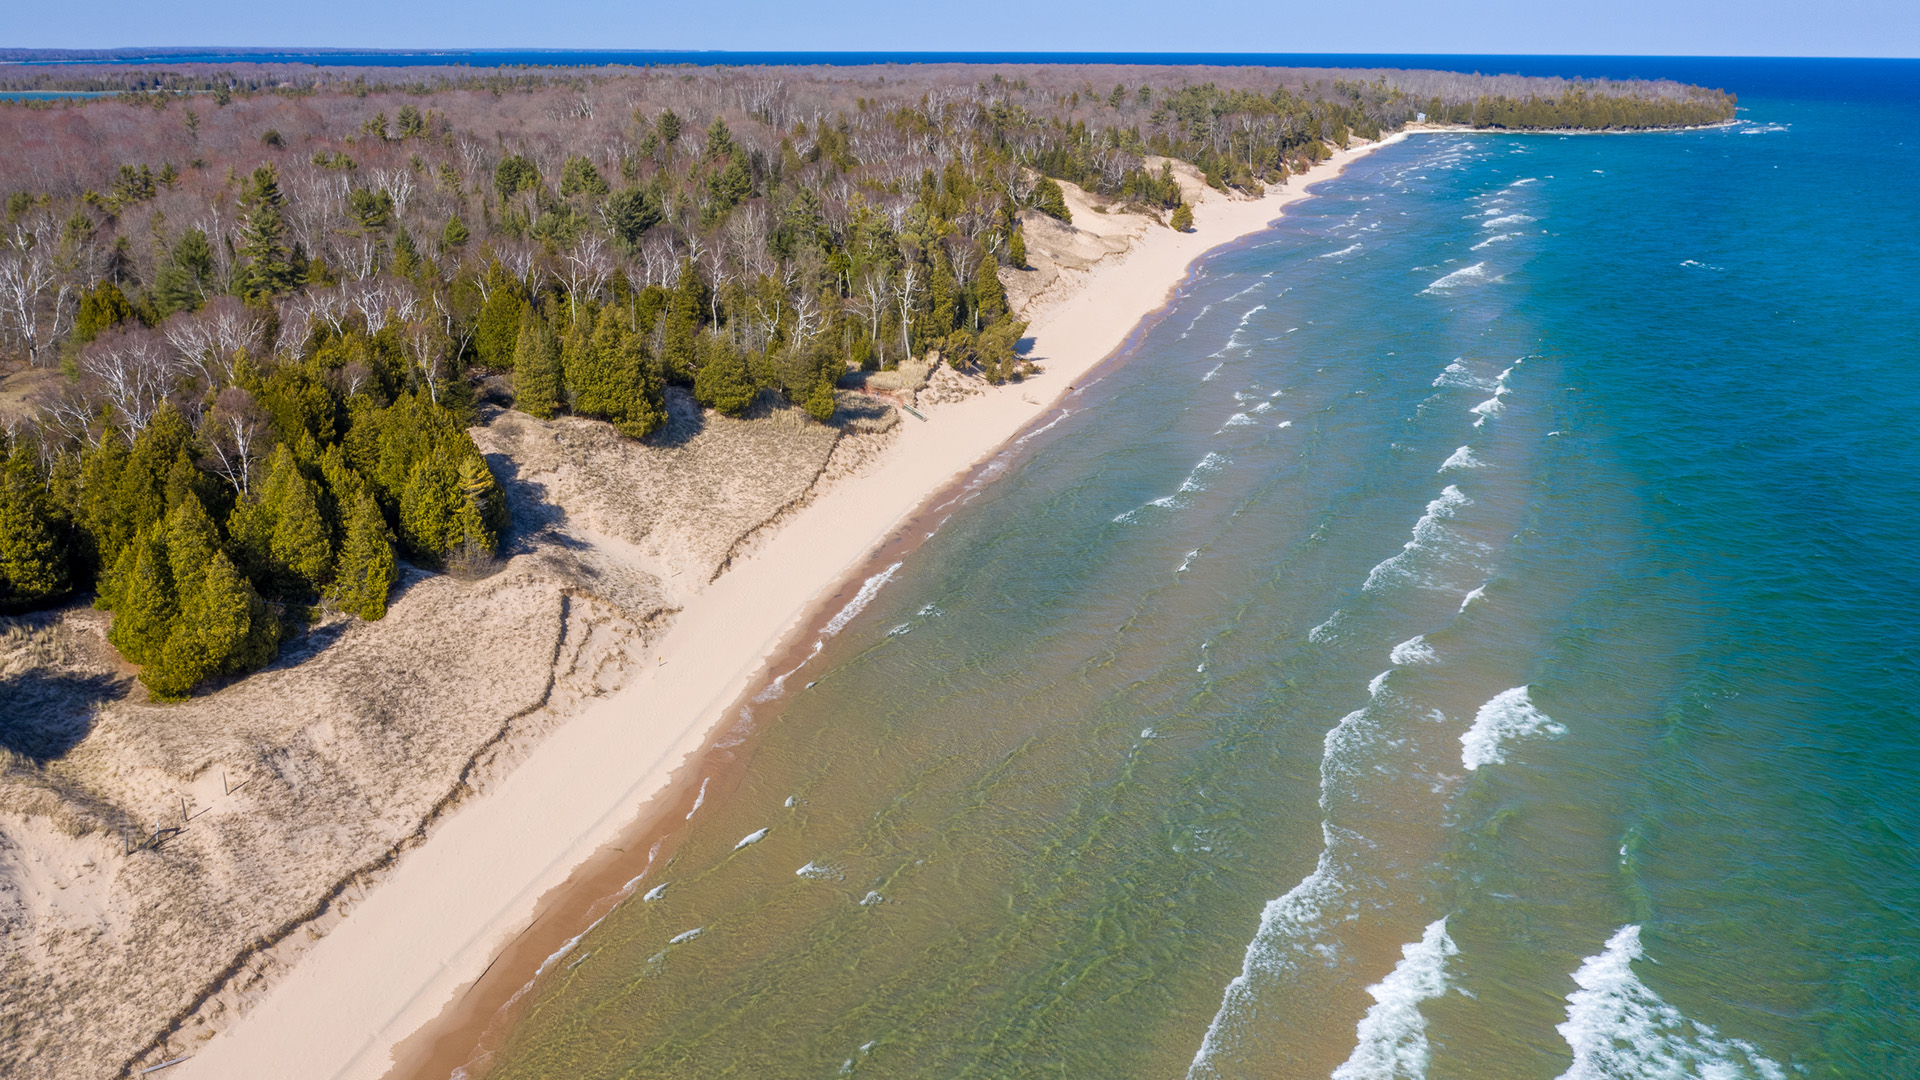 An aerial photo shows waves flowing toward a sand dune shoreline with green conifer and leafless deciduous trees on the land.